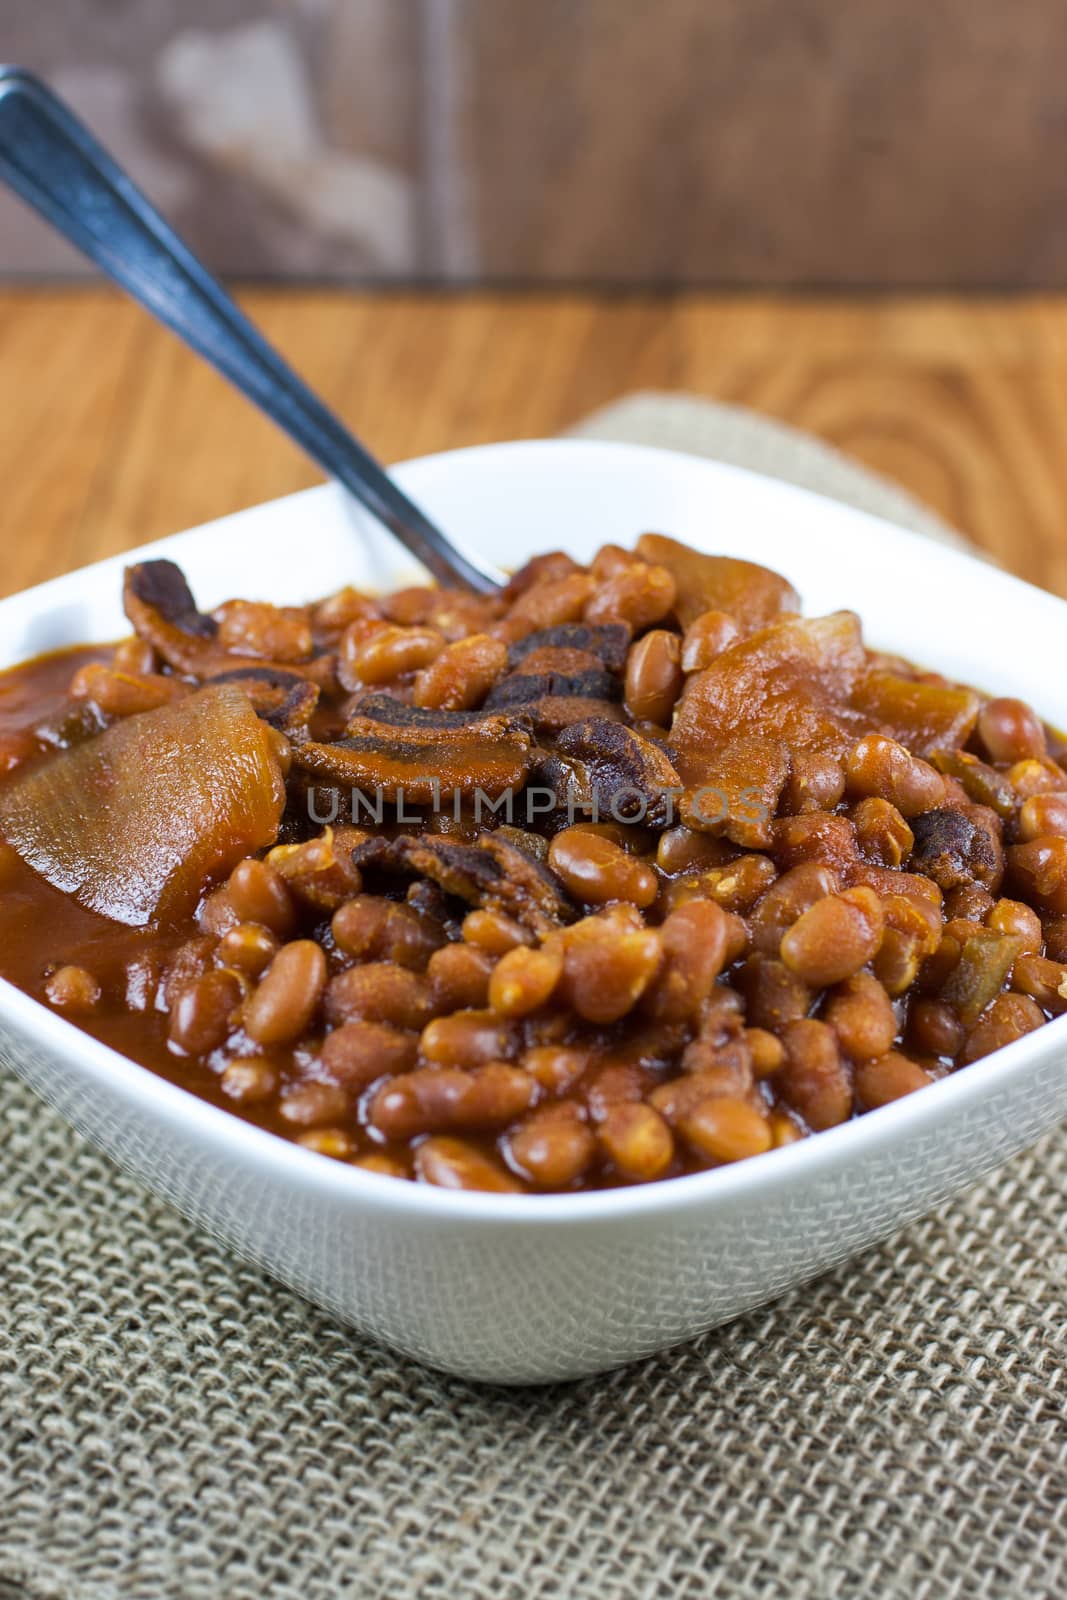 Rustic baked beans in a white bowl on a burlap placemat and wooden table.